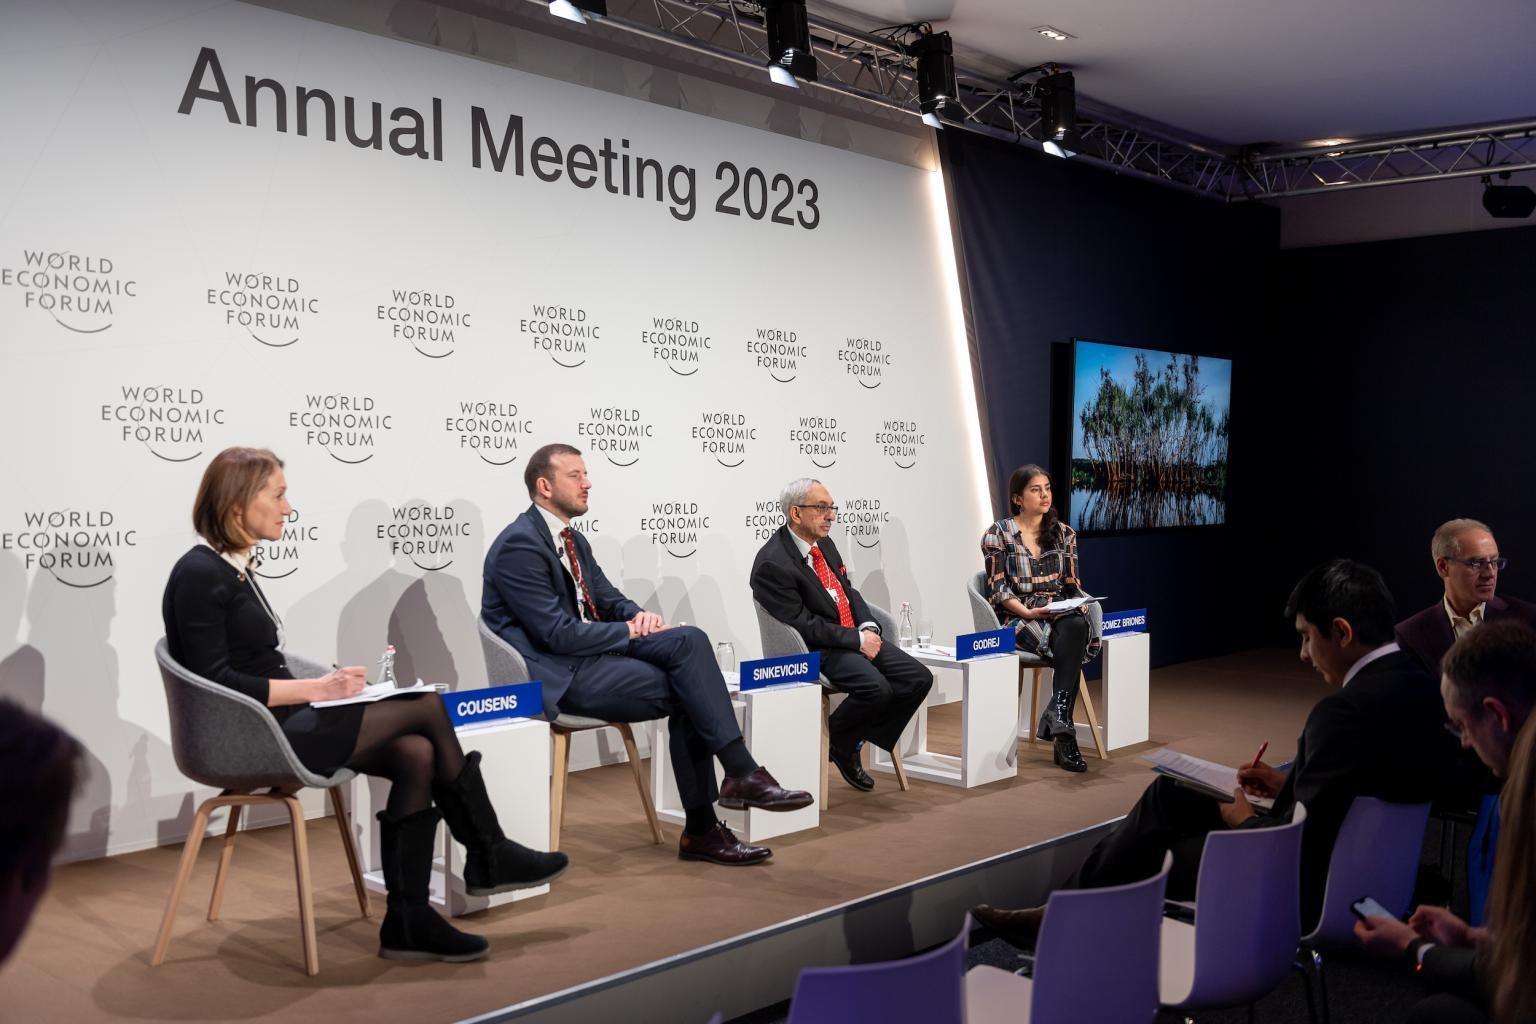 "Panel of four people on stage against a step-repeat backdrop with the World Economic Forum logo"